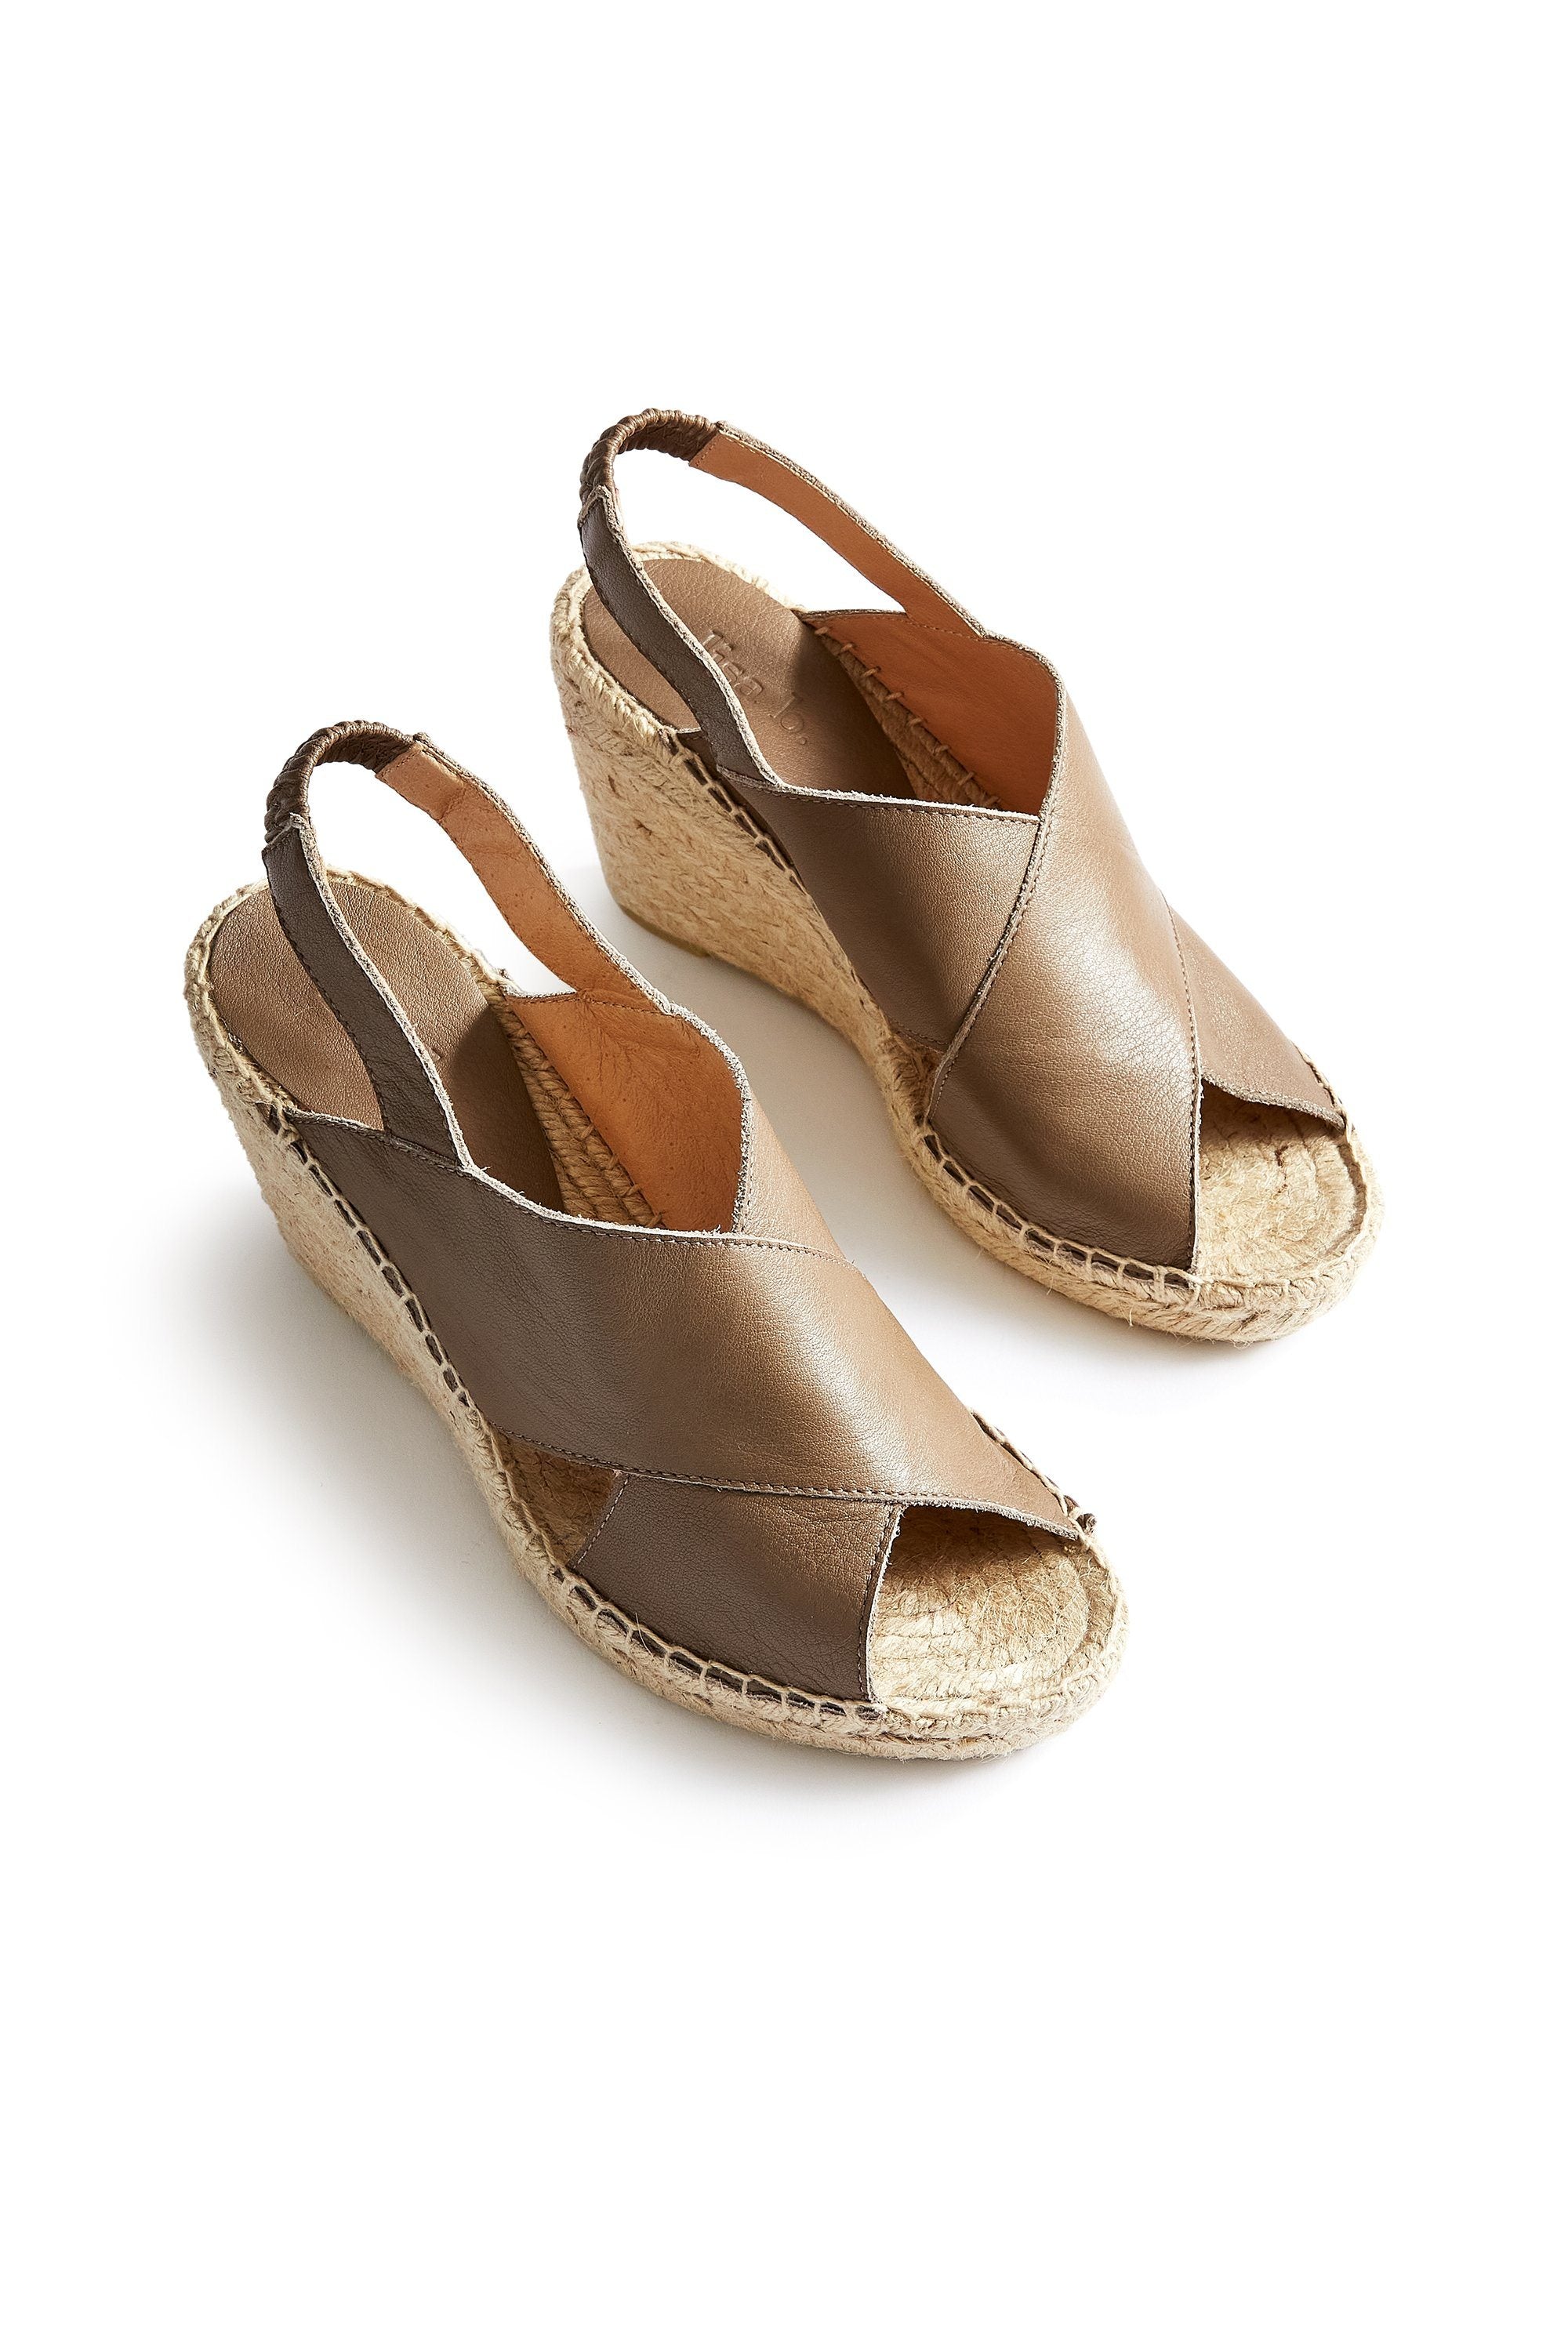 cross-over wedge espadrille in clay Espadrilles lisa b. clay 36 (US 5.5-6) 